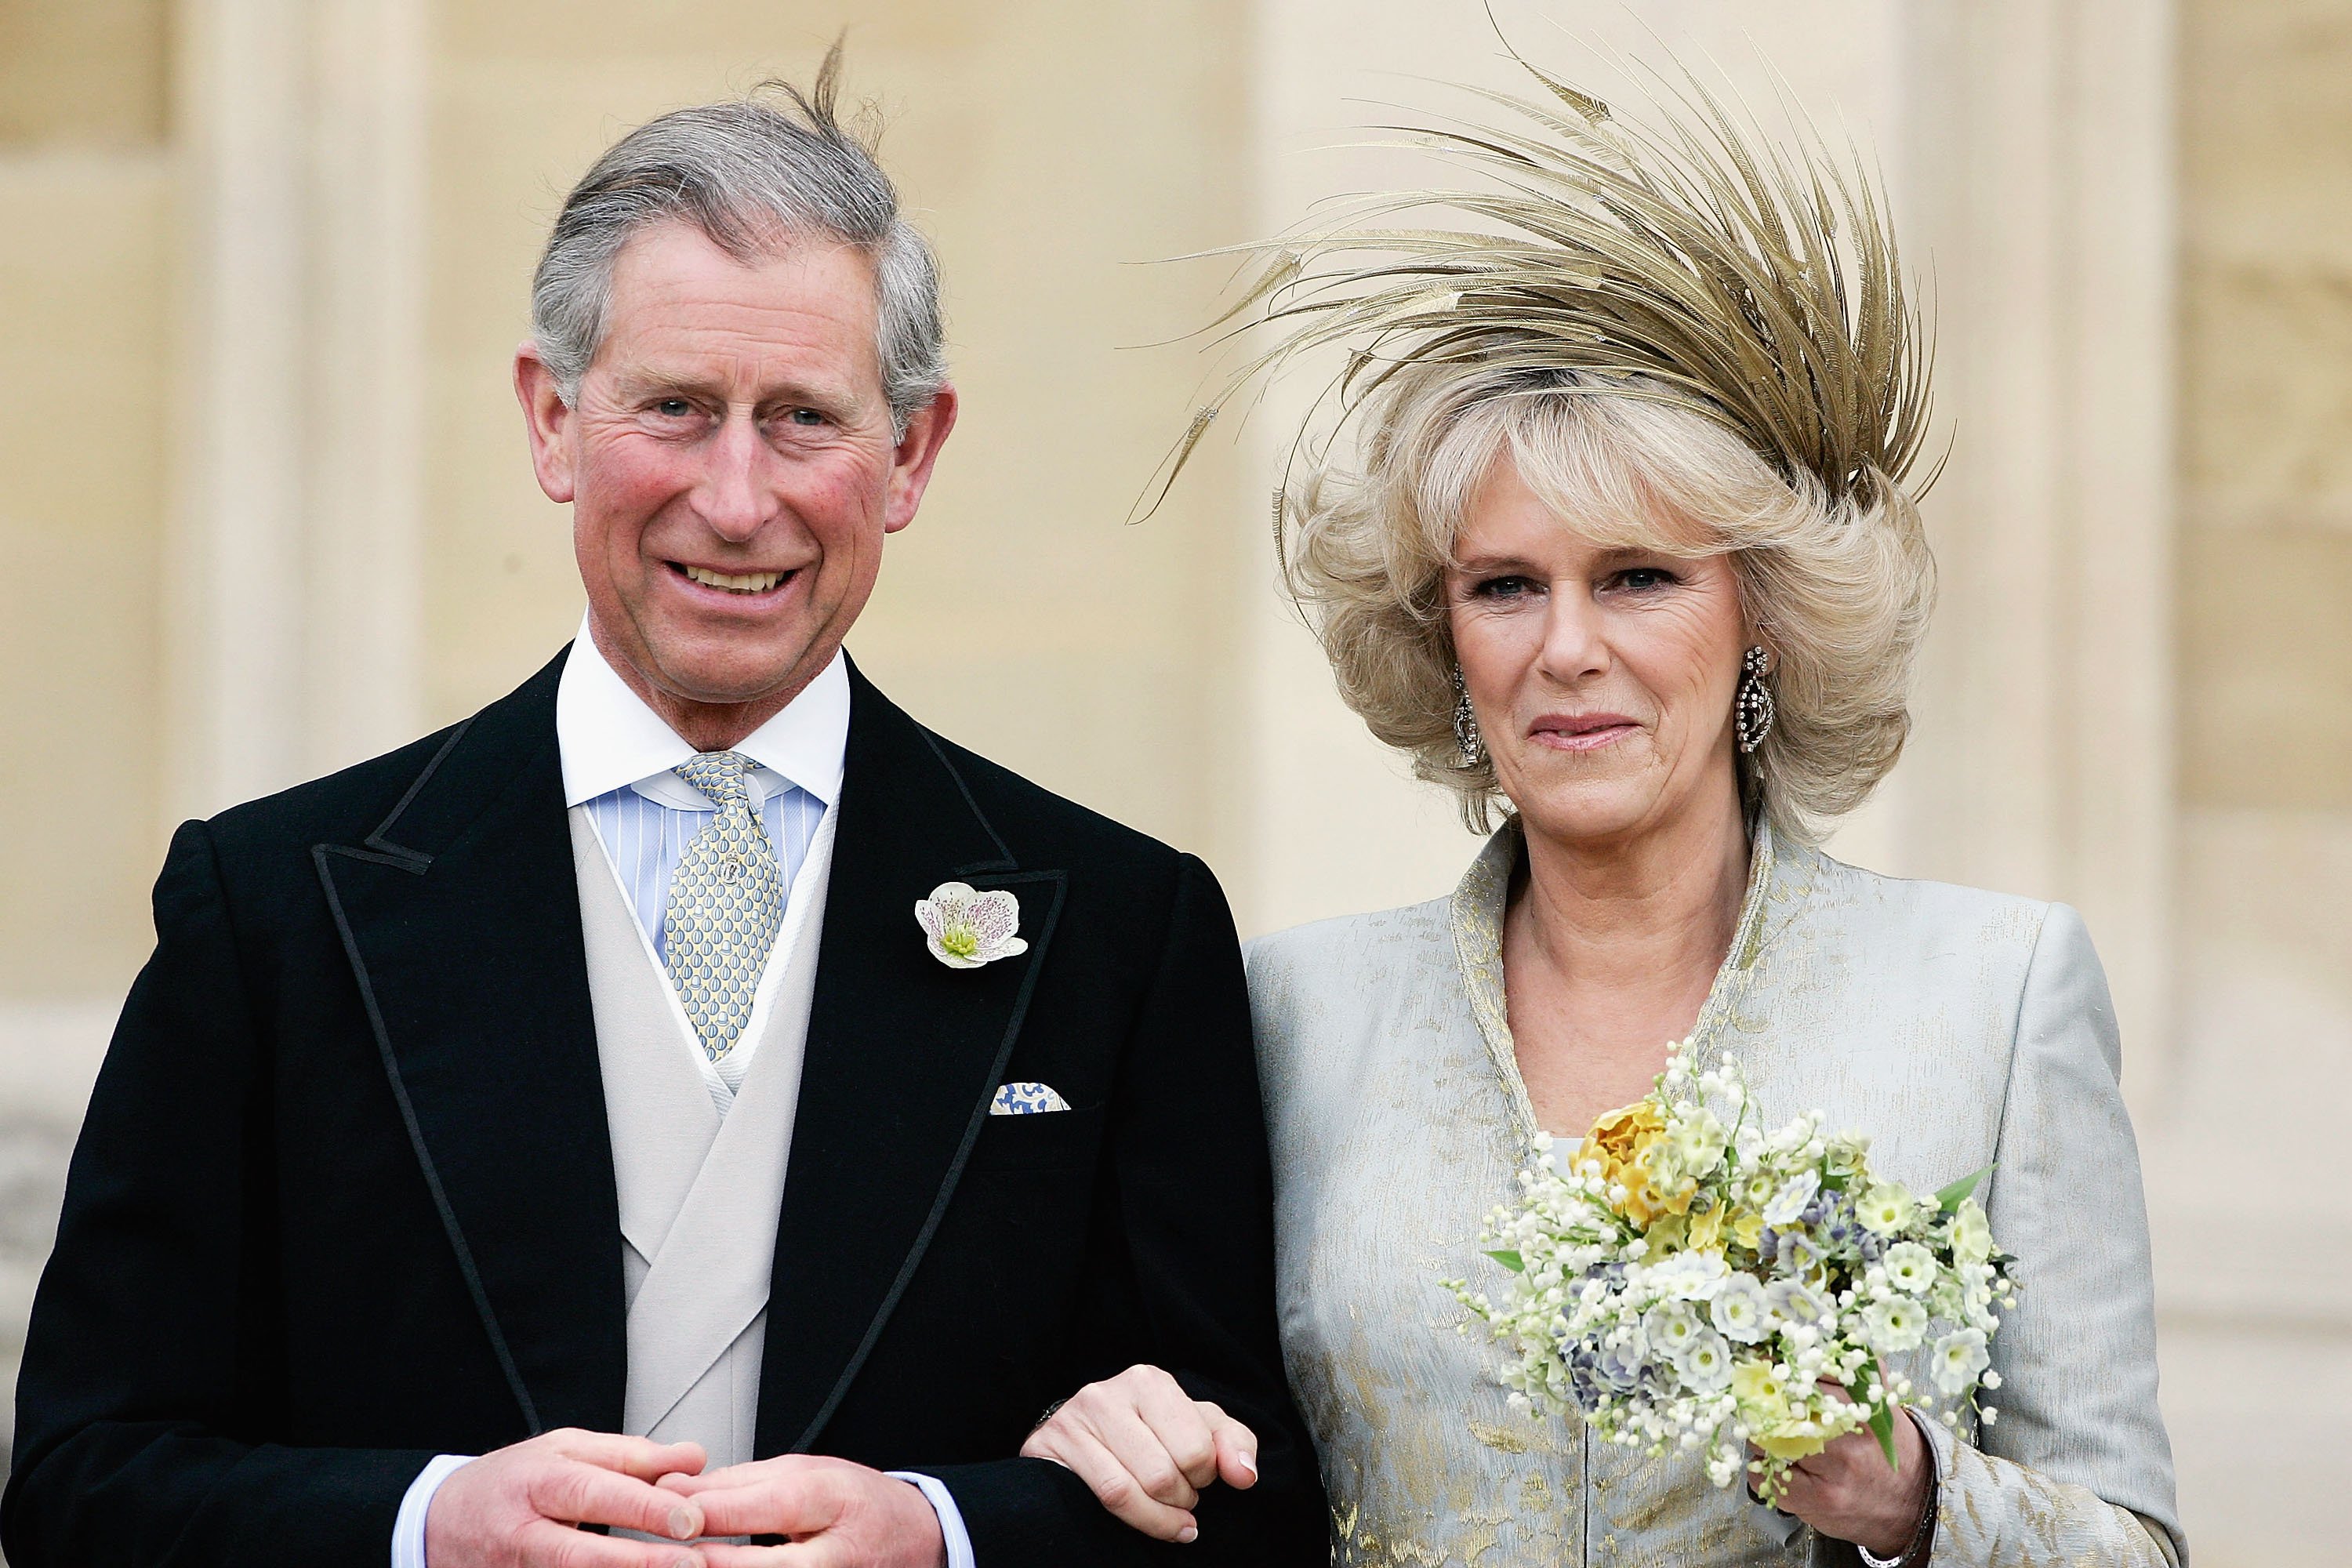 King Charles III and Queen Consort on their wedding day in London 2005. | Source: Getty Images 